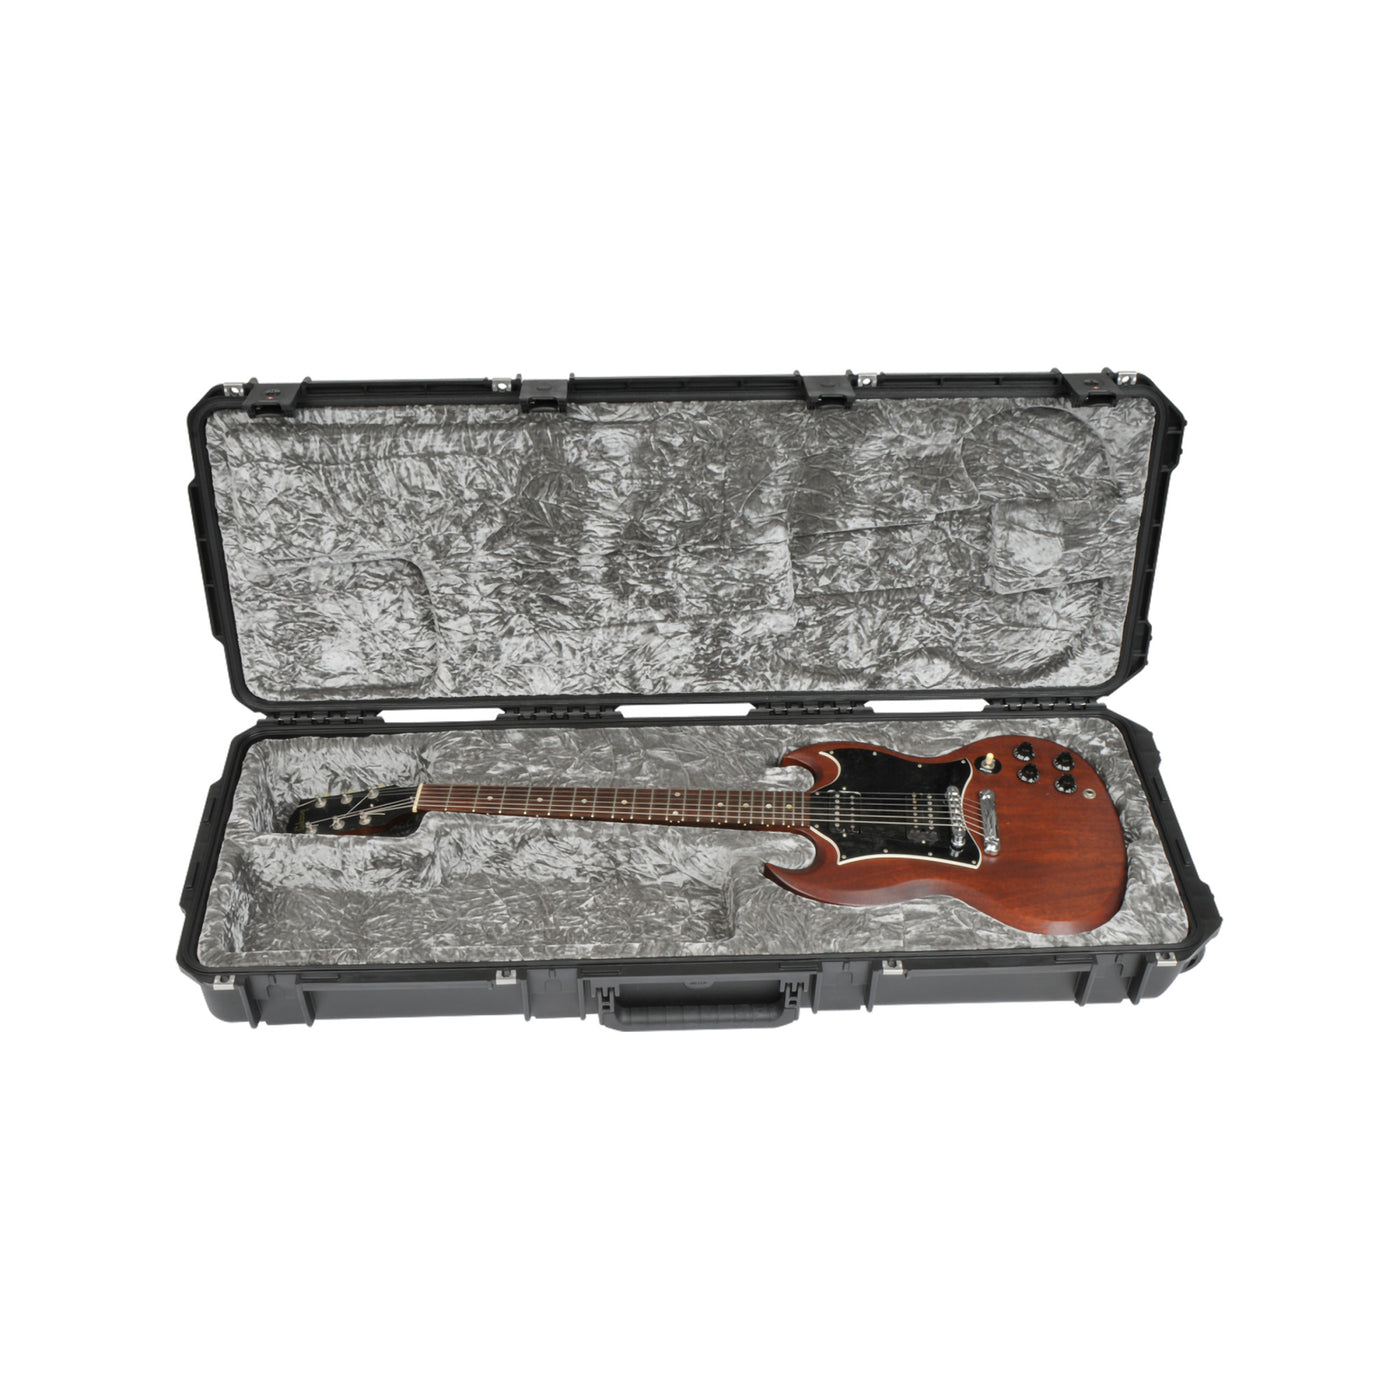 SKB Cases 3i-4214-61 iSeries Waterproof Hardshell SG (Style Guitars) Guitar Case with Pressure Equalization, Wheels, and TSA Locking Latch System